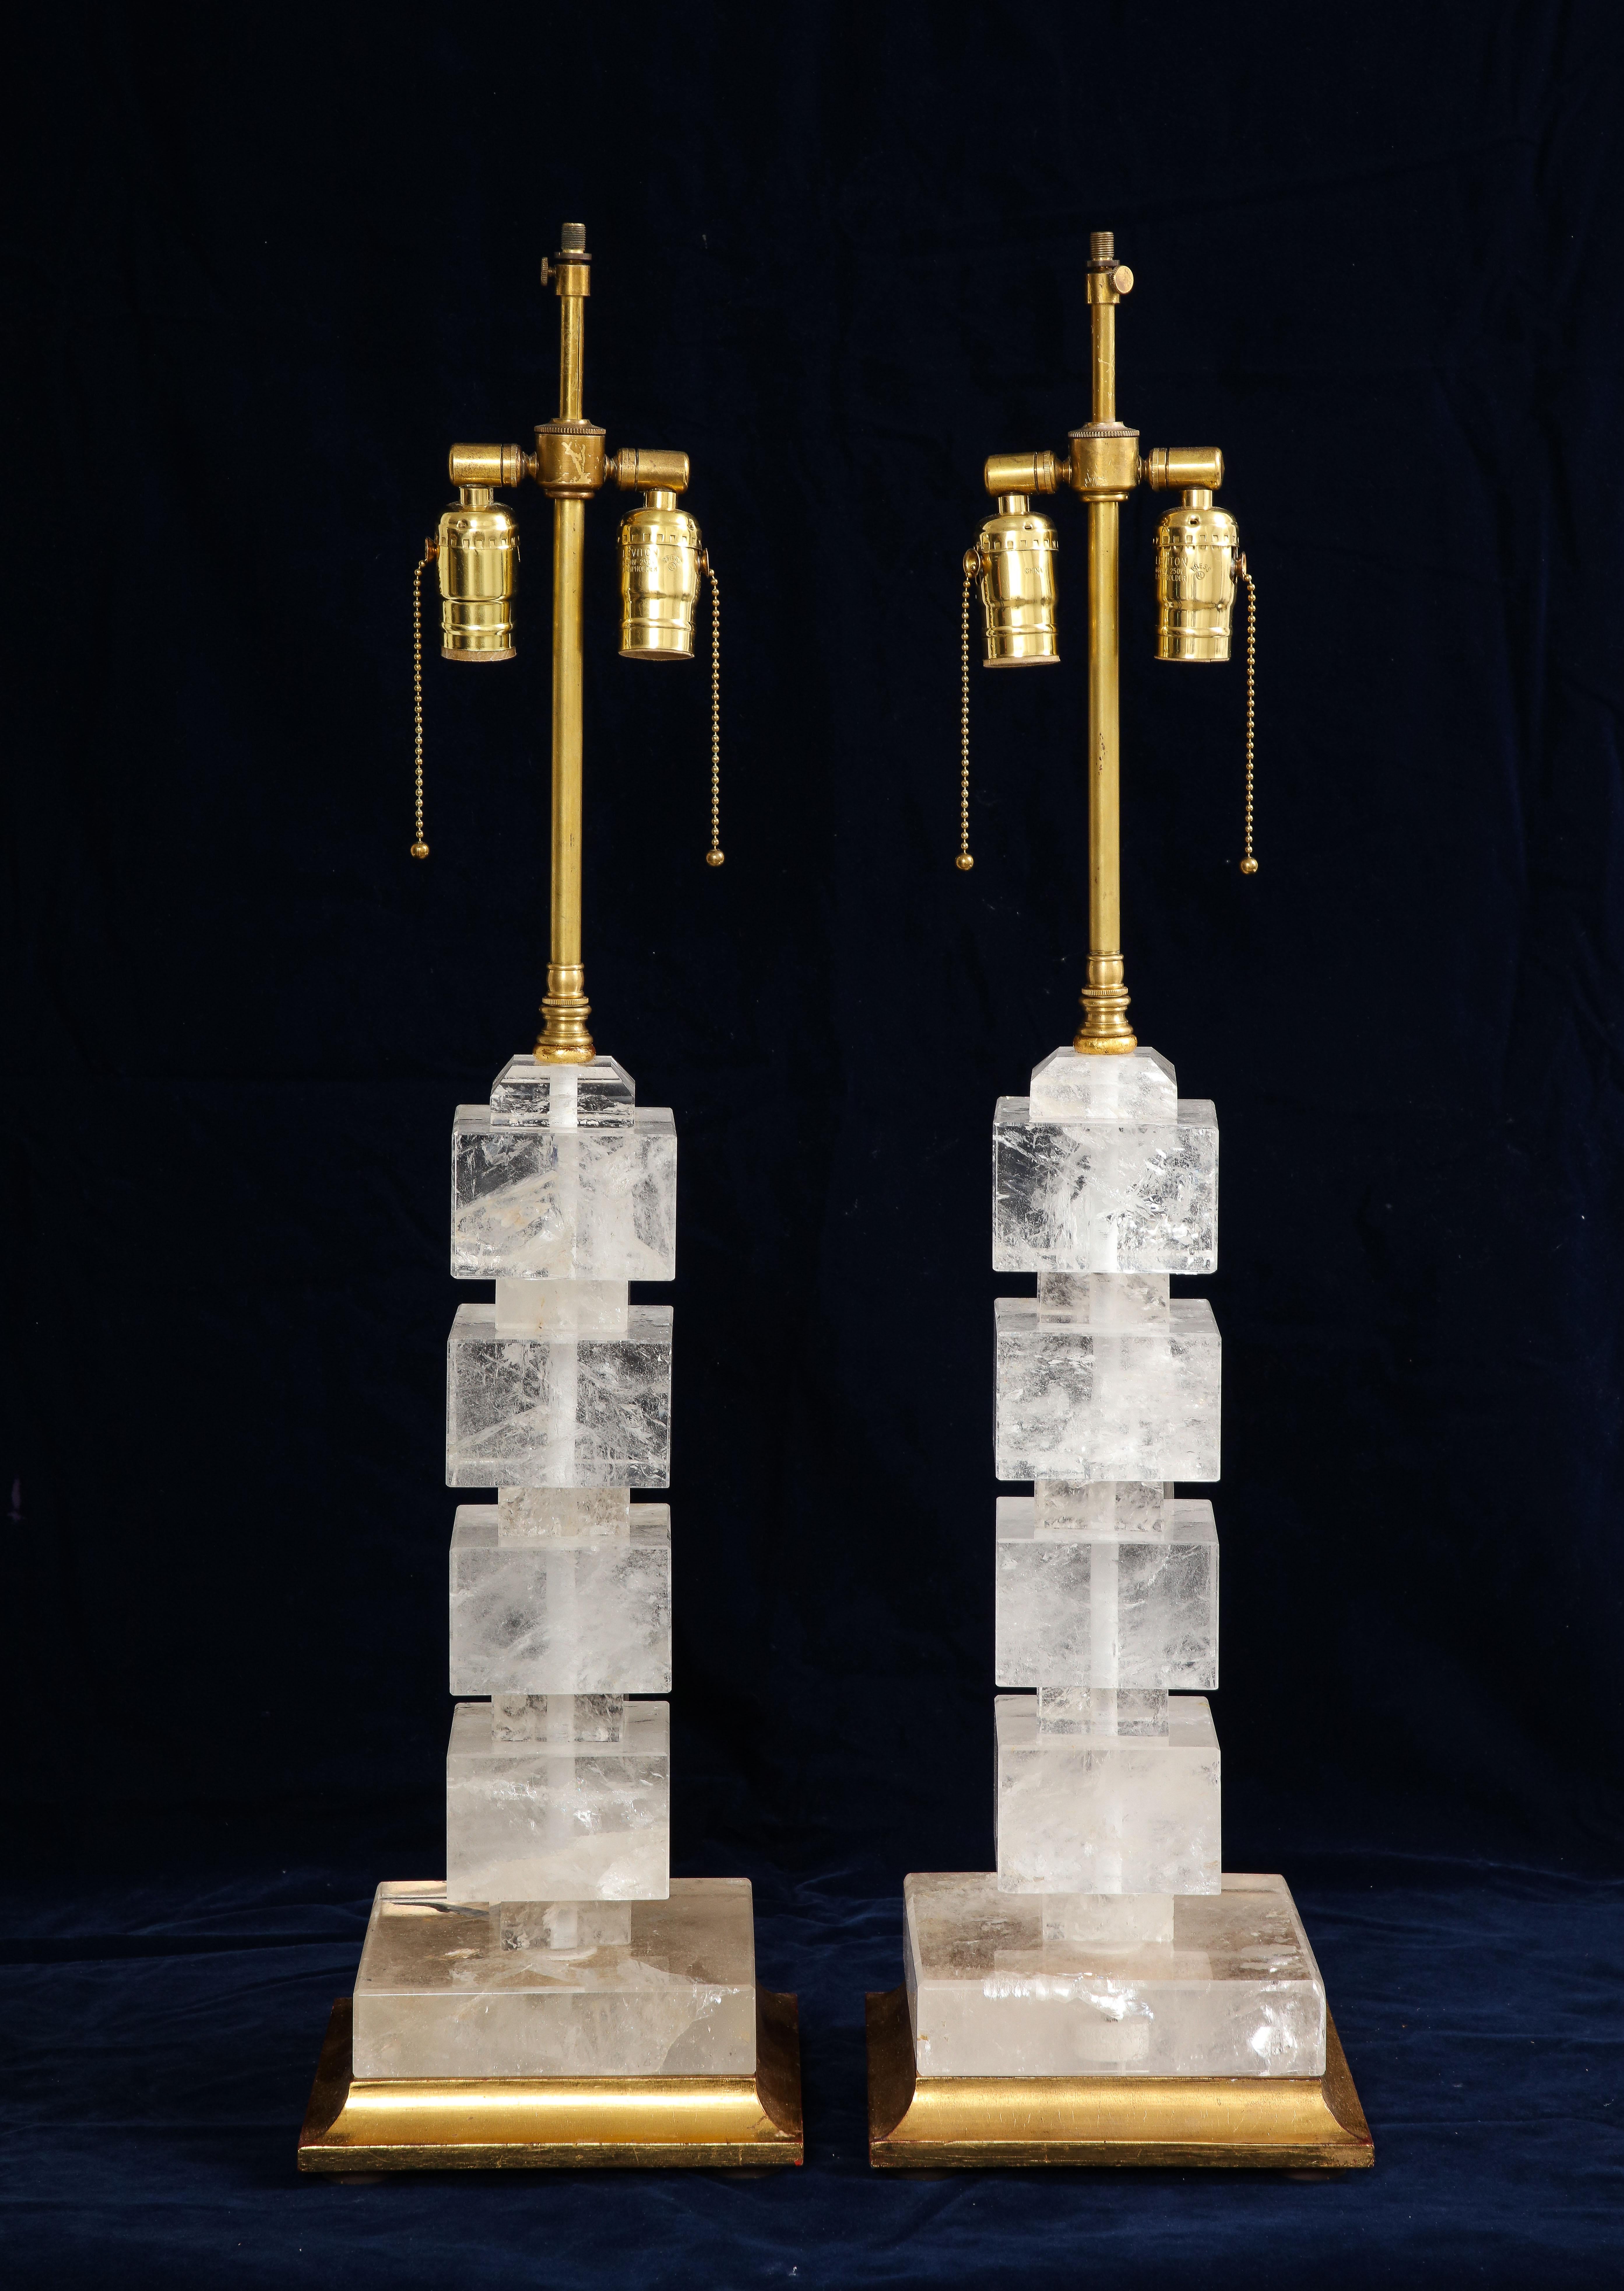 A Pair of French Art Deco Period Rock Crystal and Giltwood Square Lamps.  This stunning pair of lamps is a beautiful example of the Art Deco style, popular in the early 1900s. The lamps feature a gilt wood base that flares out towards the ground.